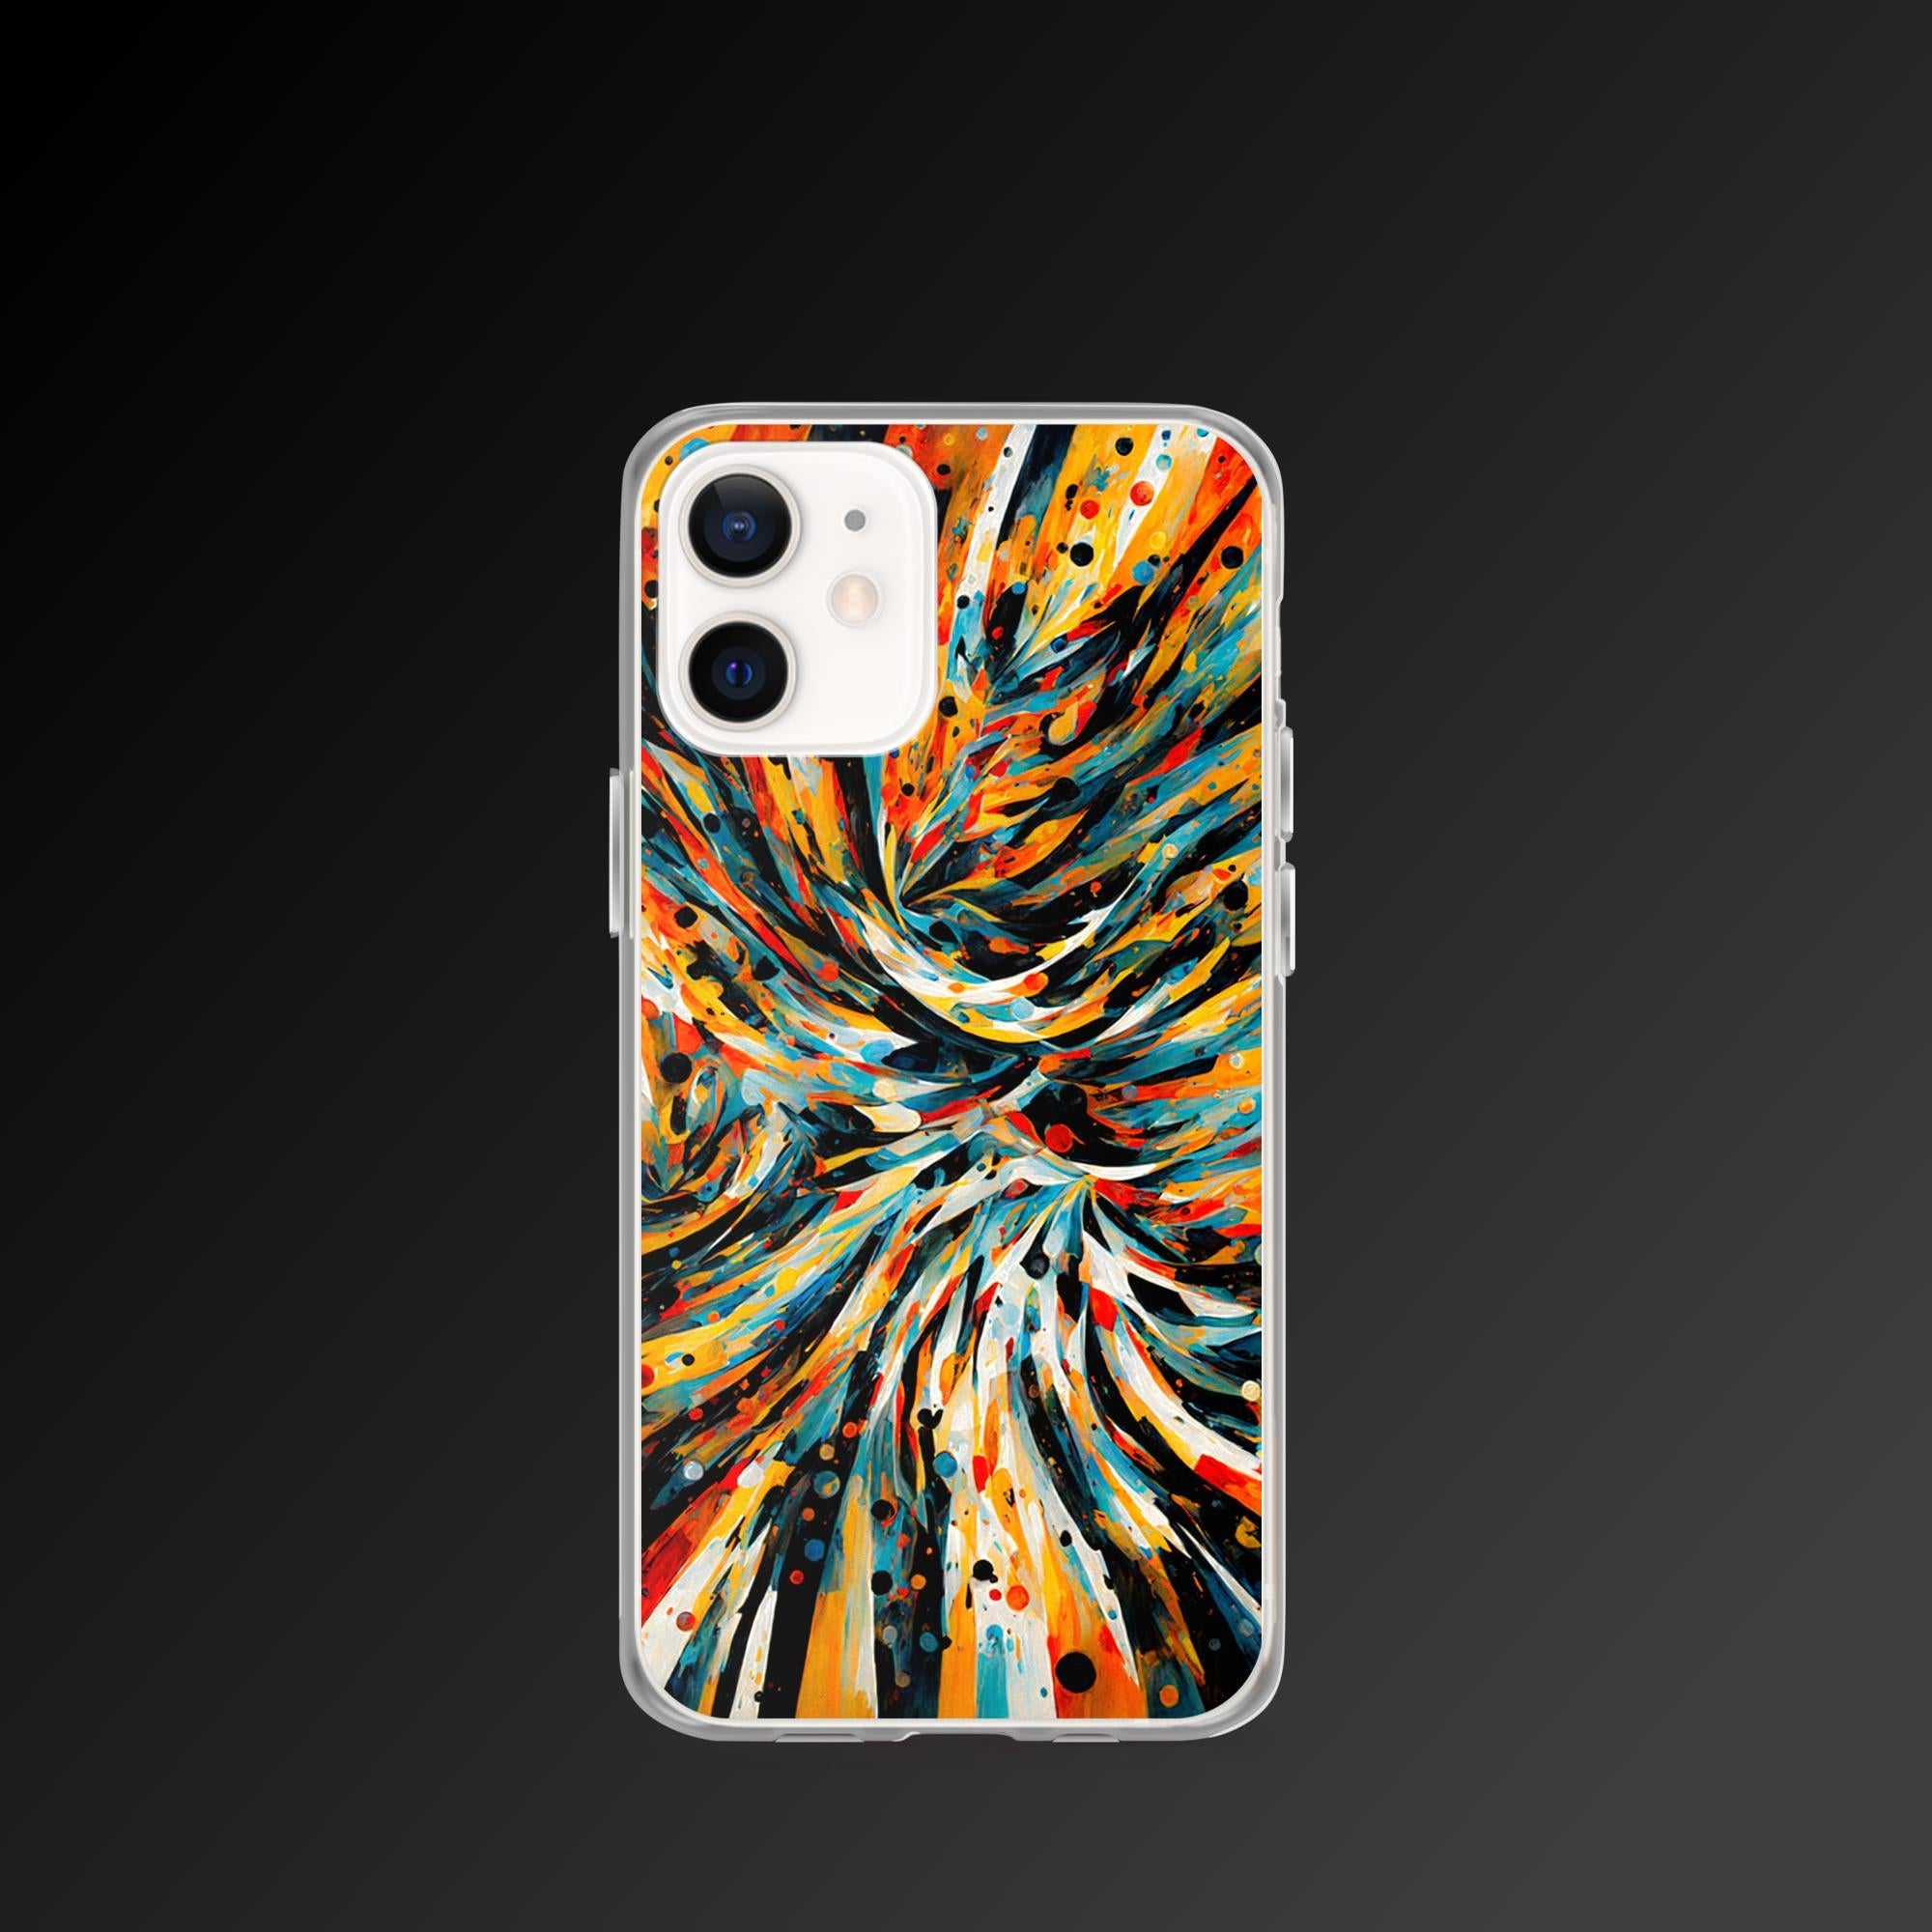 "Losing yourself" clear iphone cases - Clear iphone case - Ever colorful